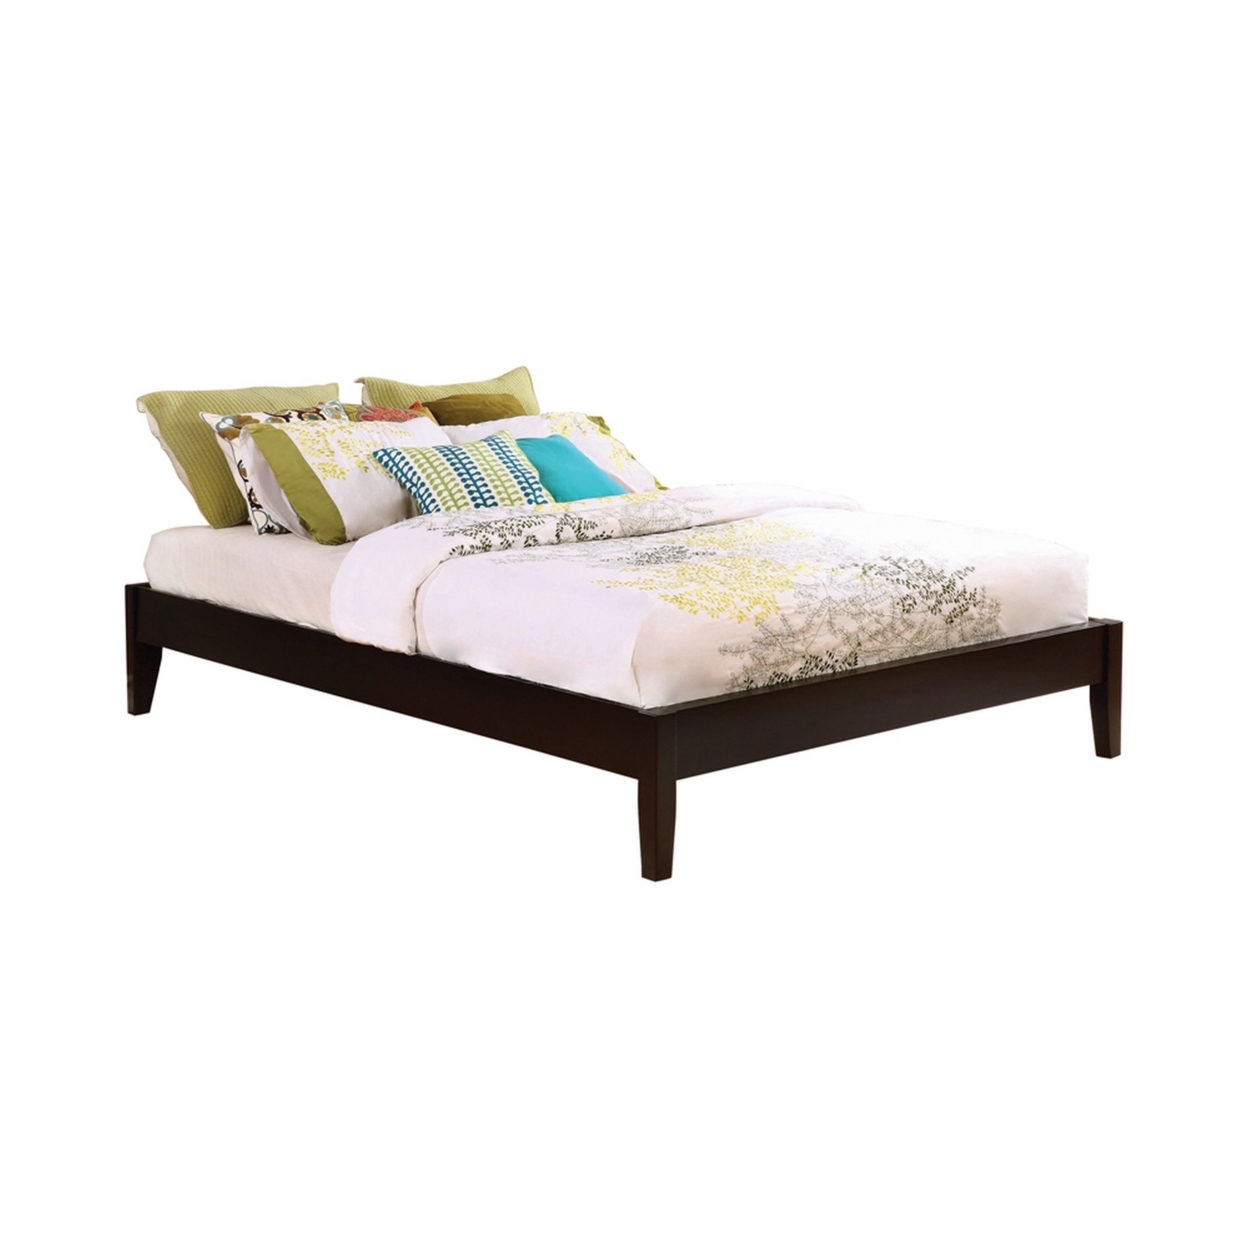 Wooden Full Size Bed Frame With Chamfered Legs, Dark Brown- Saltoro Sherpi